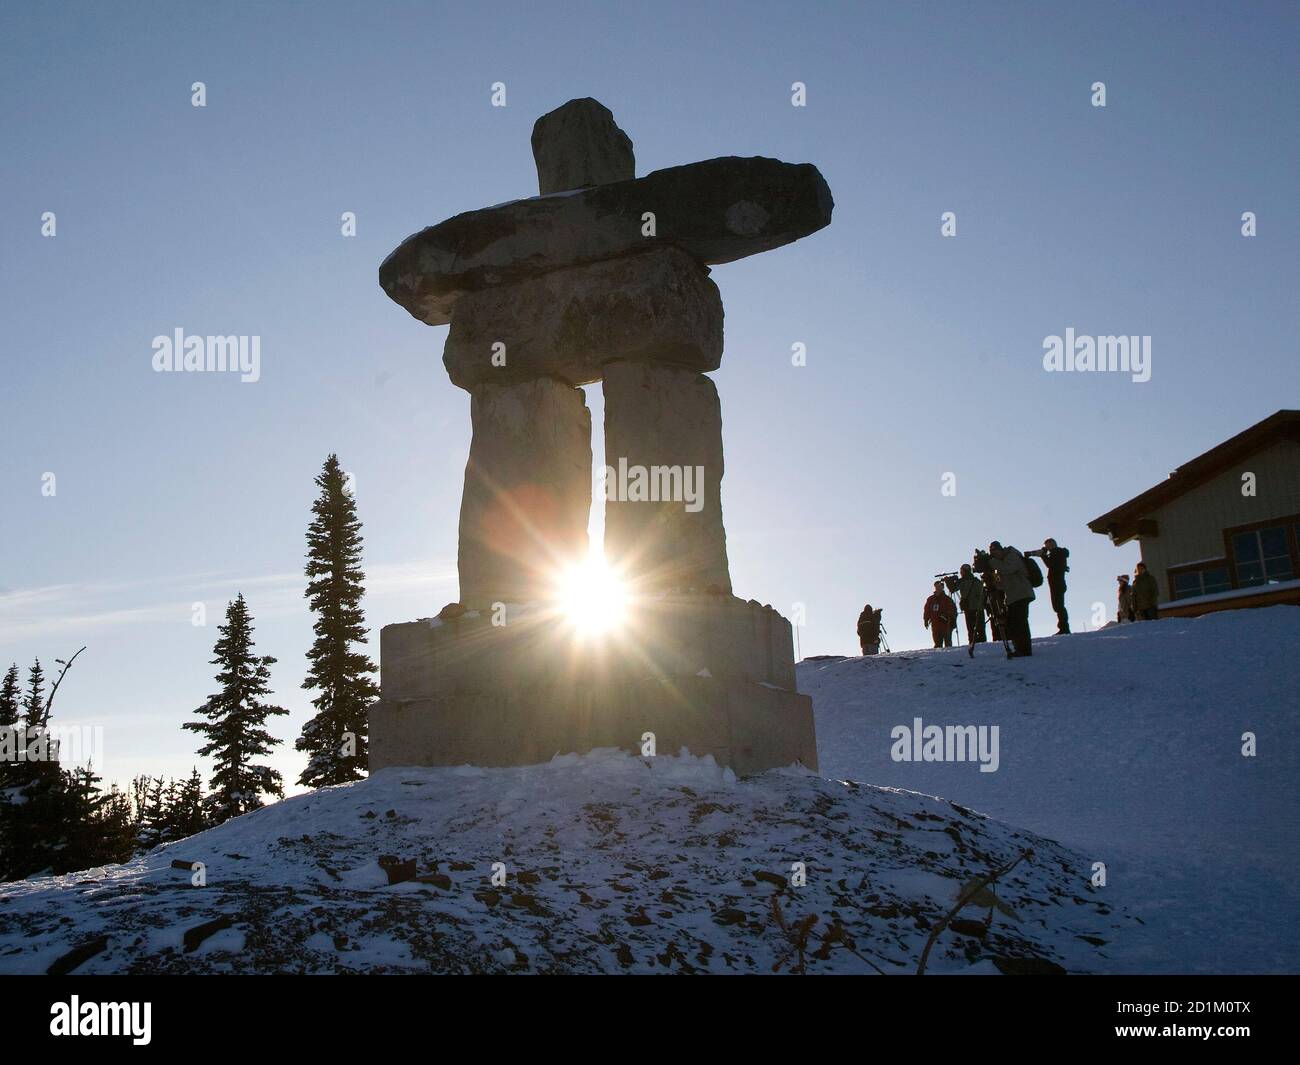 The sun rises between the legs of an Inukshuk atop Whistler Mountain in Whistler, British Columbia December 11, 2008. The Inukshuk is man made landmark used by the peoples of the North American Arctic as a navigation point. Whistler will be the site of the alpine and Nordic events of the 2010 Olympic Winter Games.   REUTERS/Andy Clark     (CANADA) Stock Photo